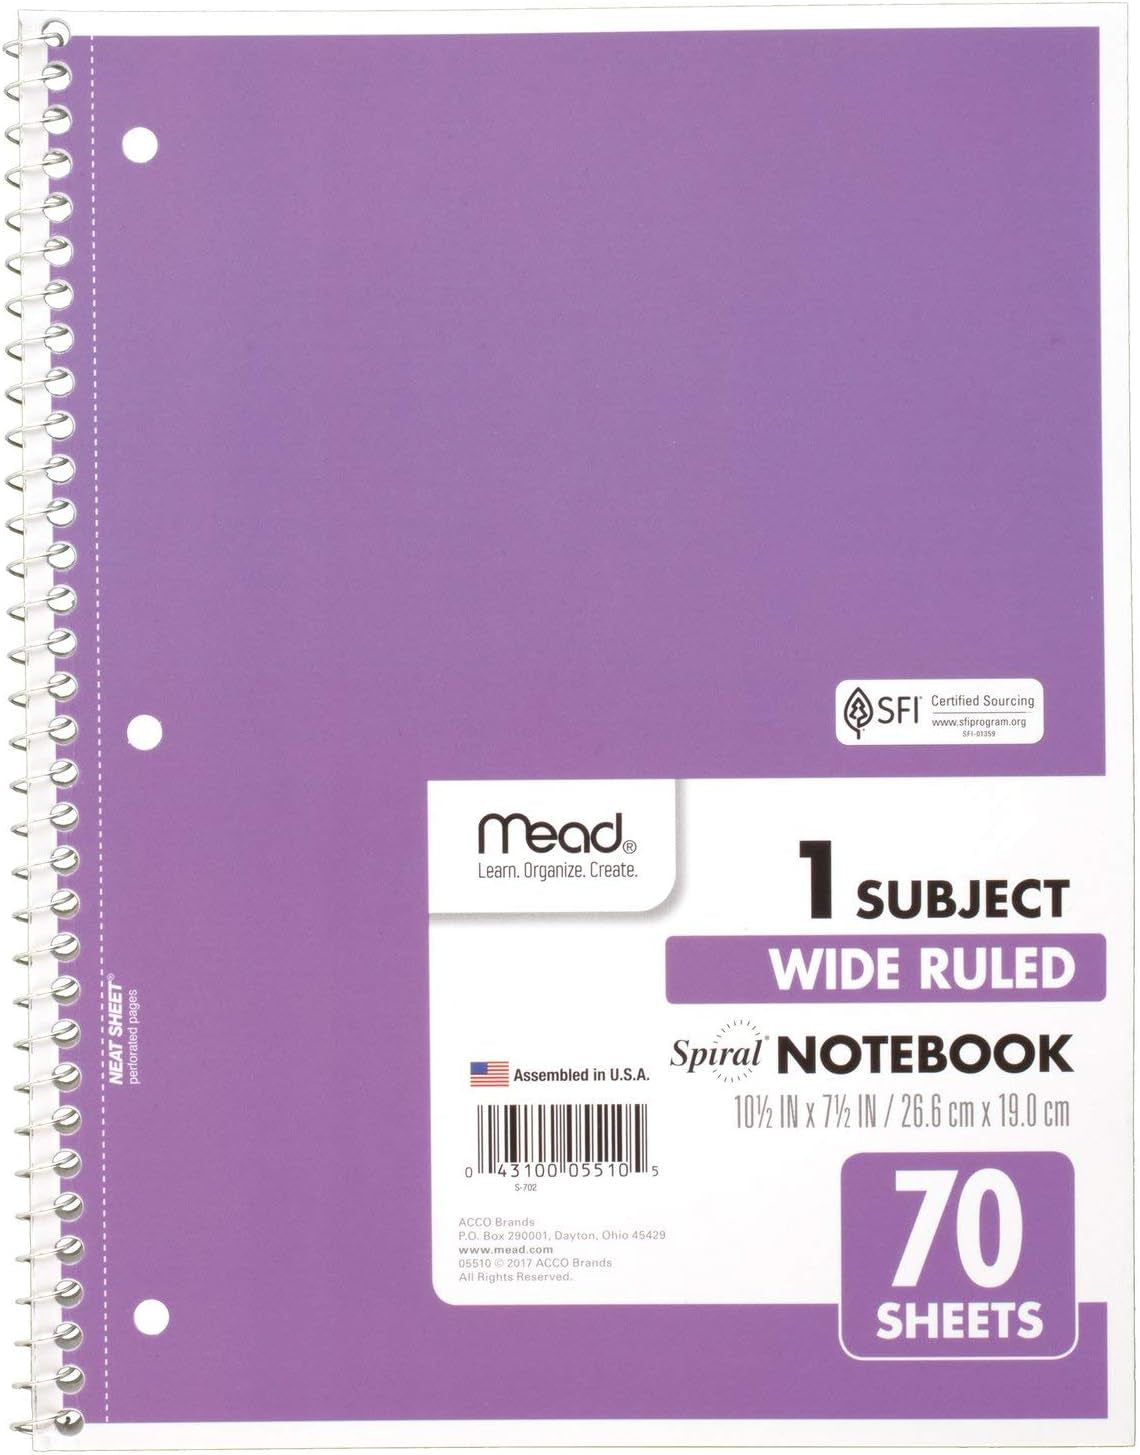 Spiral Notebook, 6 Pack, 1-Subject, Wide Ruled Paper, 7-1/2" X 10-1/2", 70 Sheets per Notebook, Color Will Vary ()